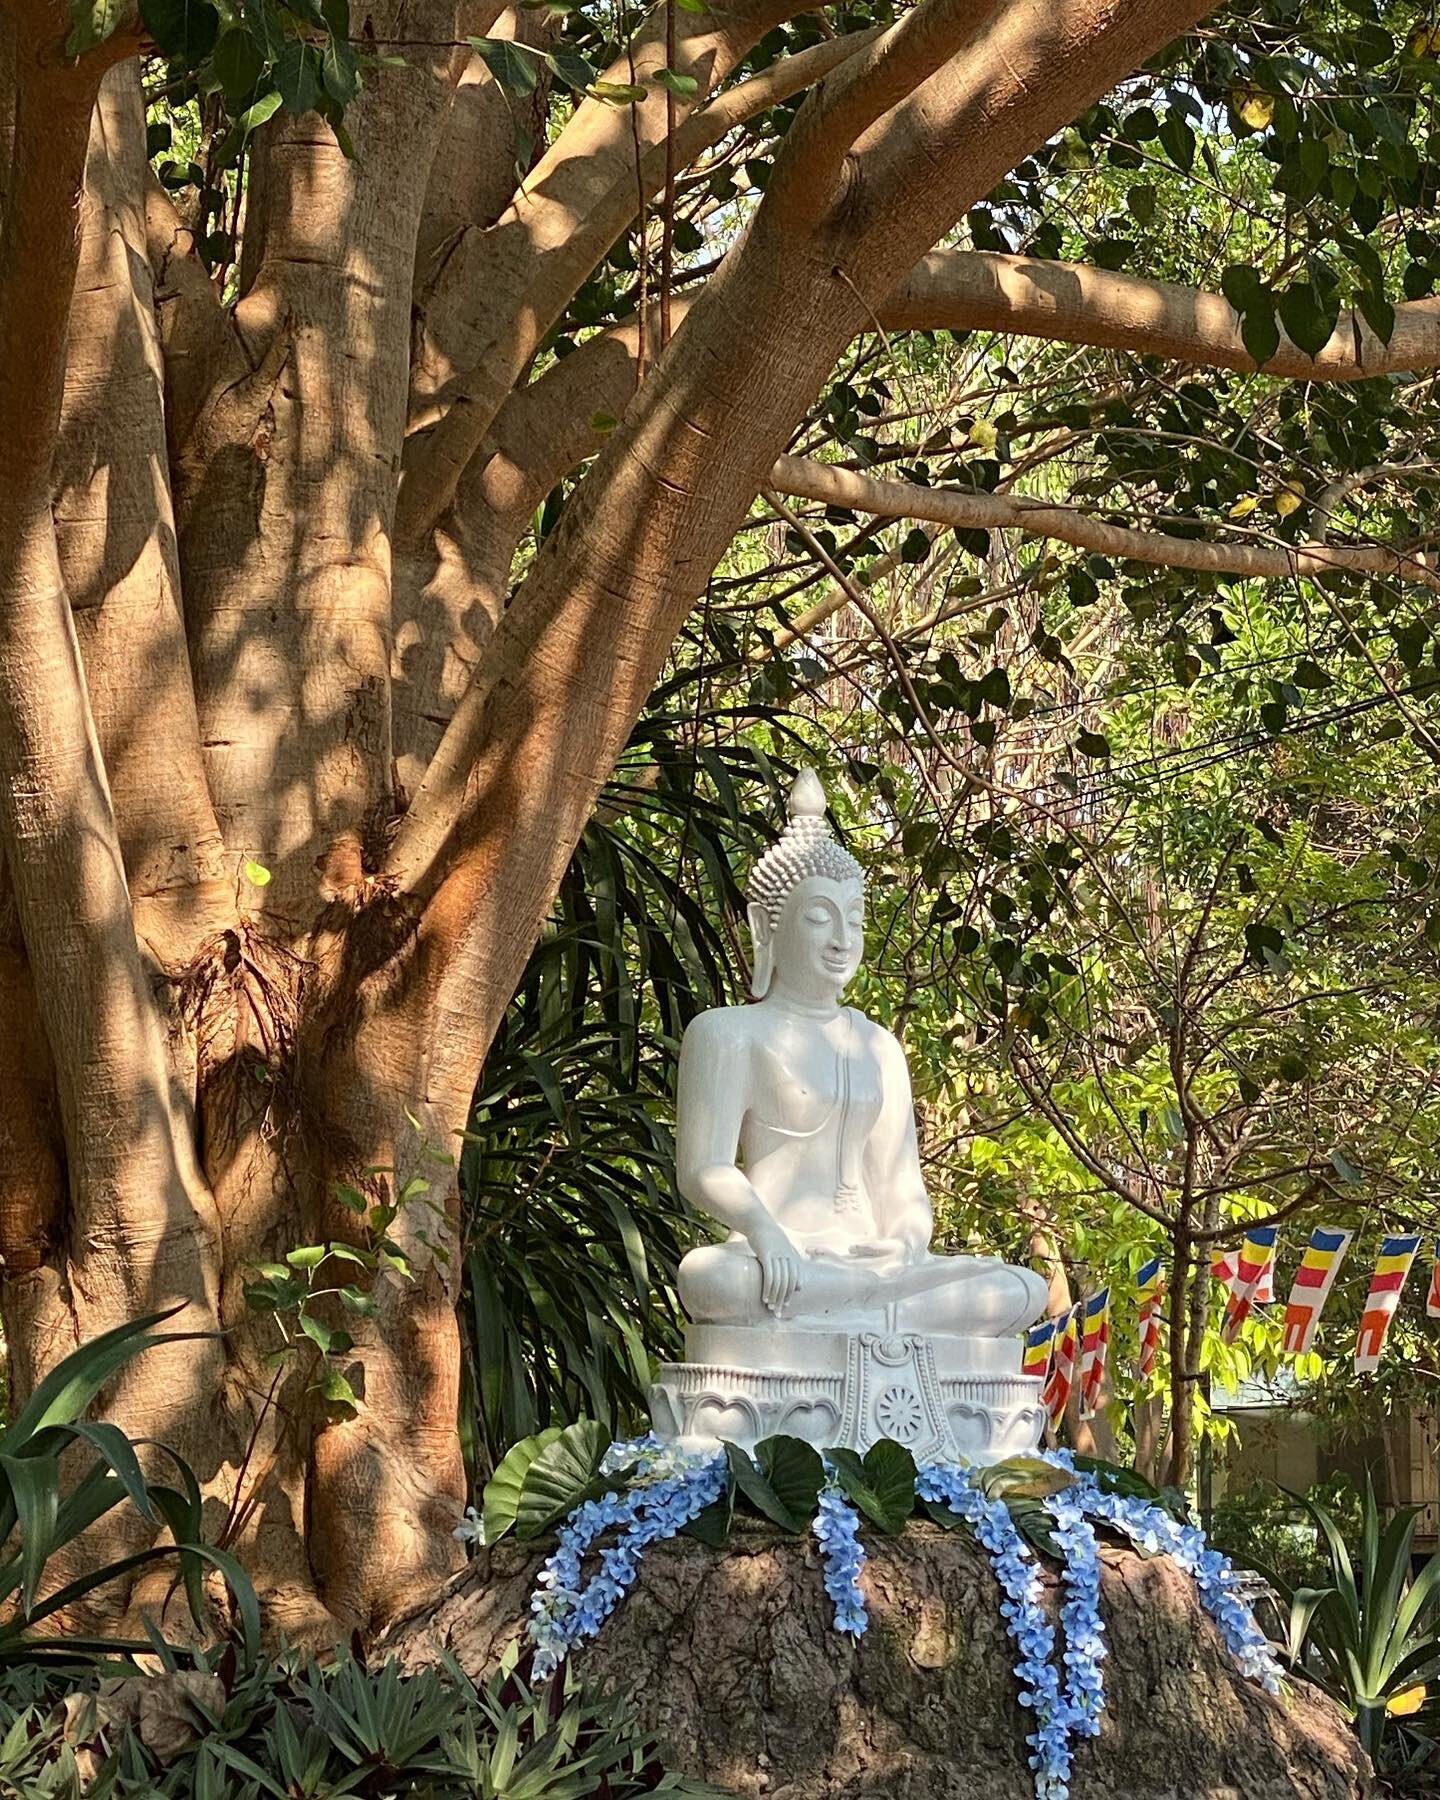 while i&rsquo;ve been back home now for just over a week, i wanted to catch up on sharing some of my favourite glimpses of my last month in thailand. here is the monastery&rsquo;s opening garden and the freshly scrubbed and spray painted buddha image